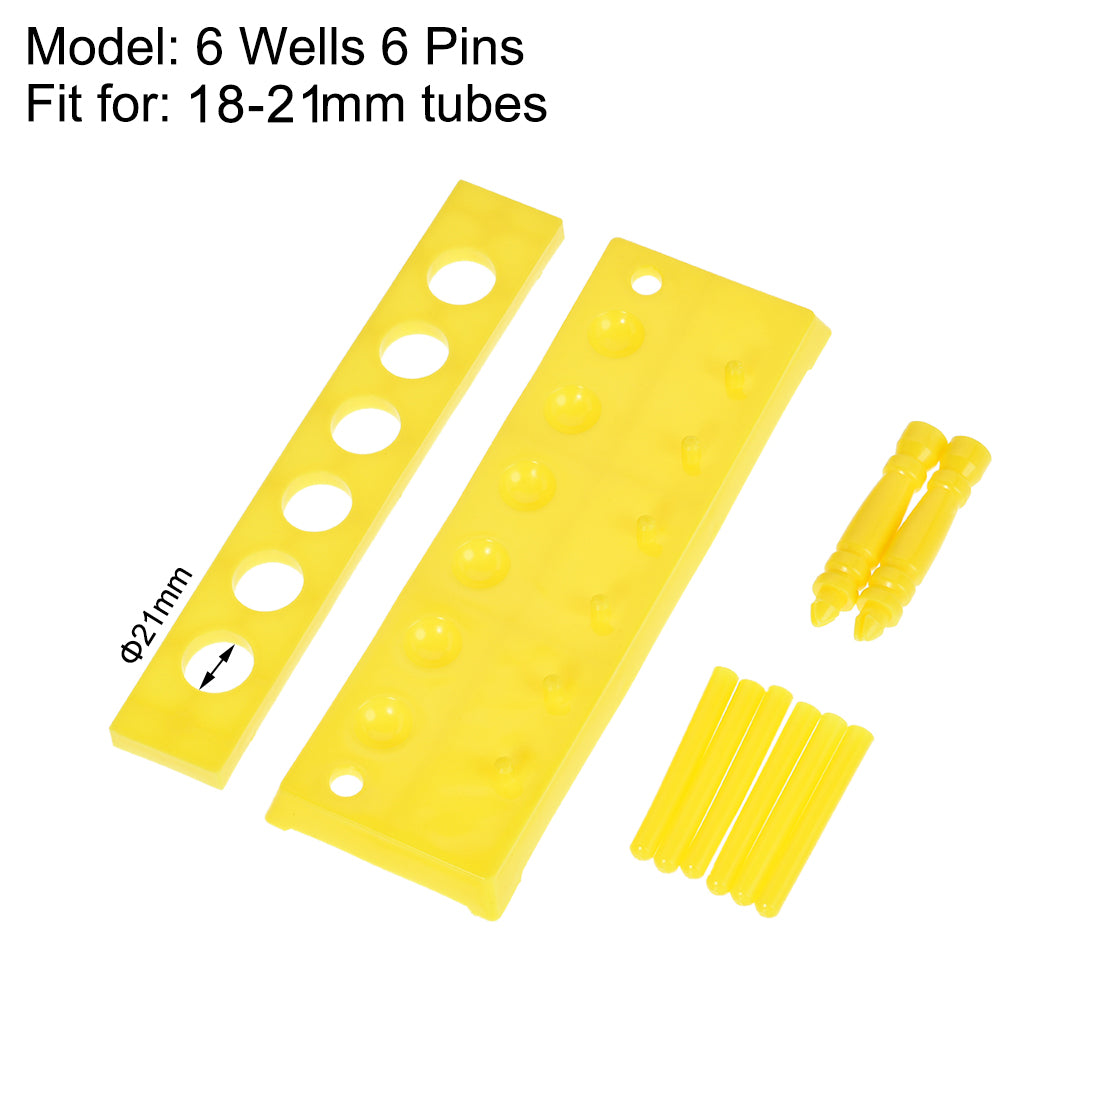 uxcell Uxcell Test Tube Holder Rack 6 Wells 6 Pins for 18-21mm Tubes Yellow 2Pcs